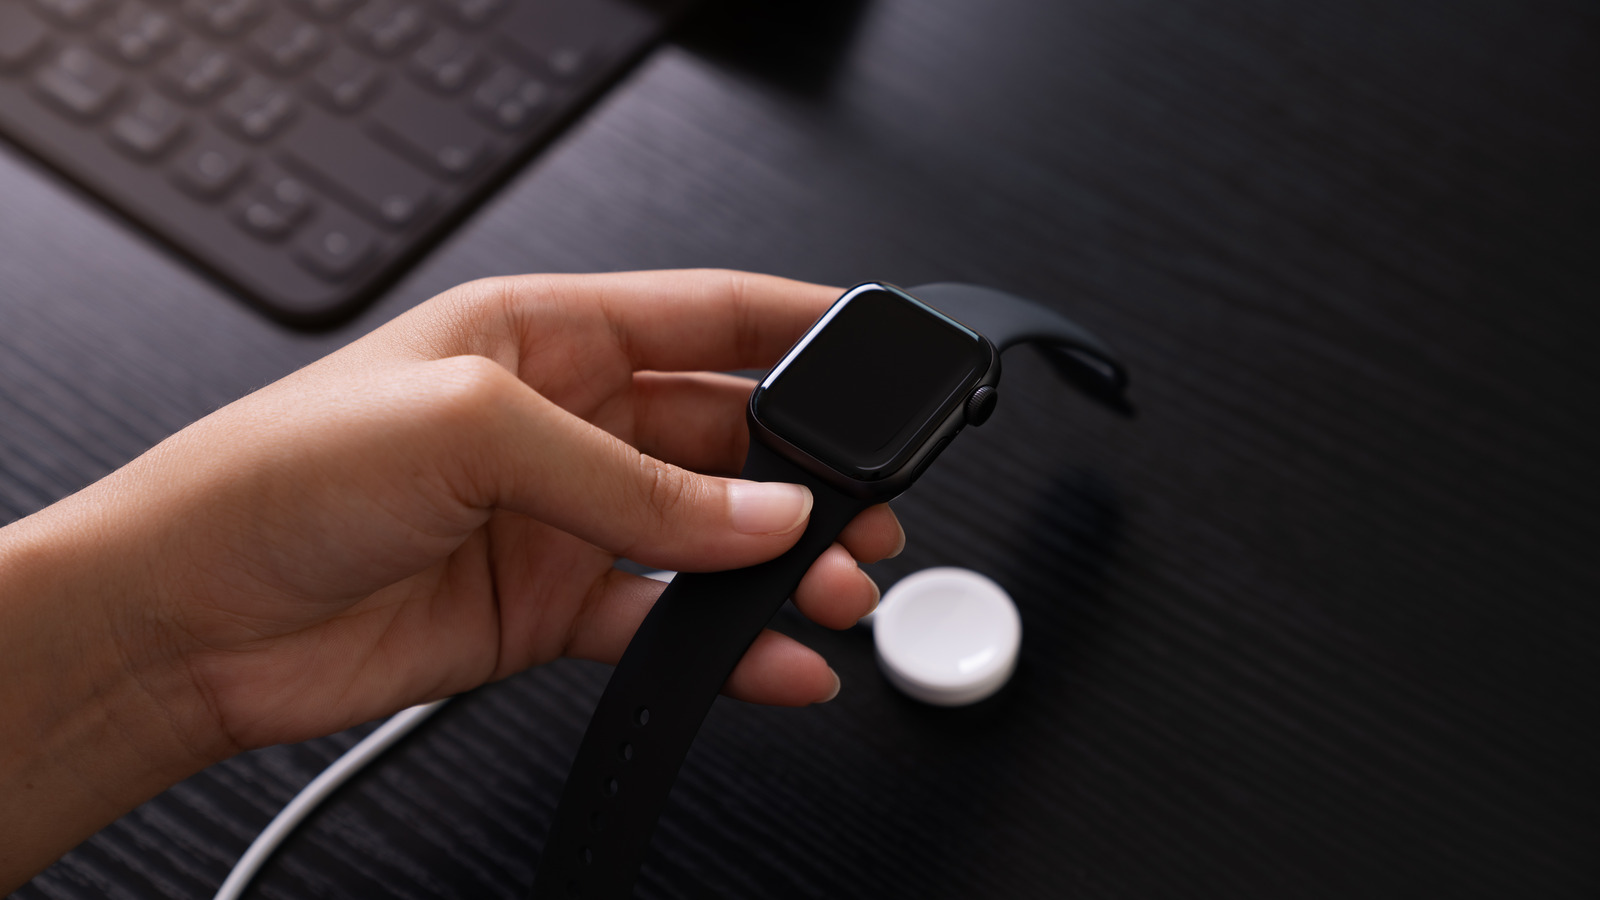 Can You Charge An Apple Watch Without The Apple Charger?